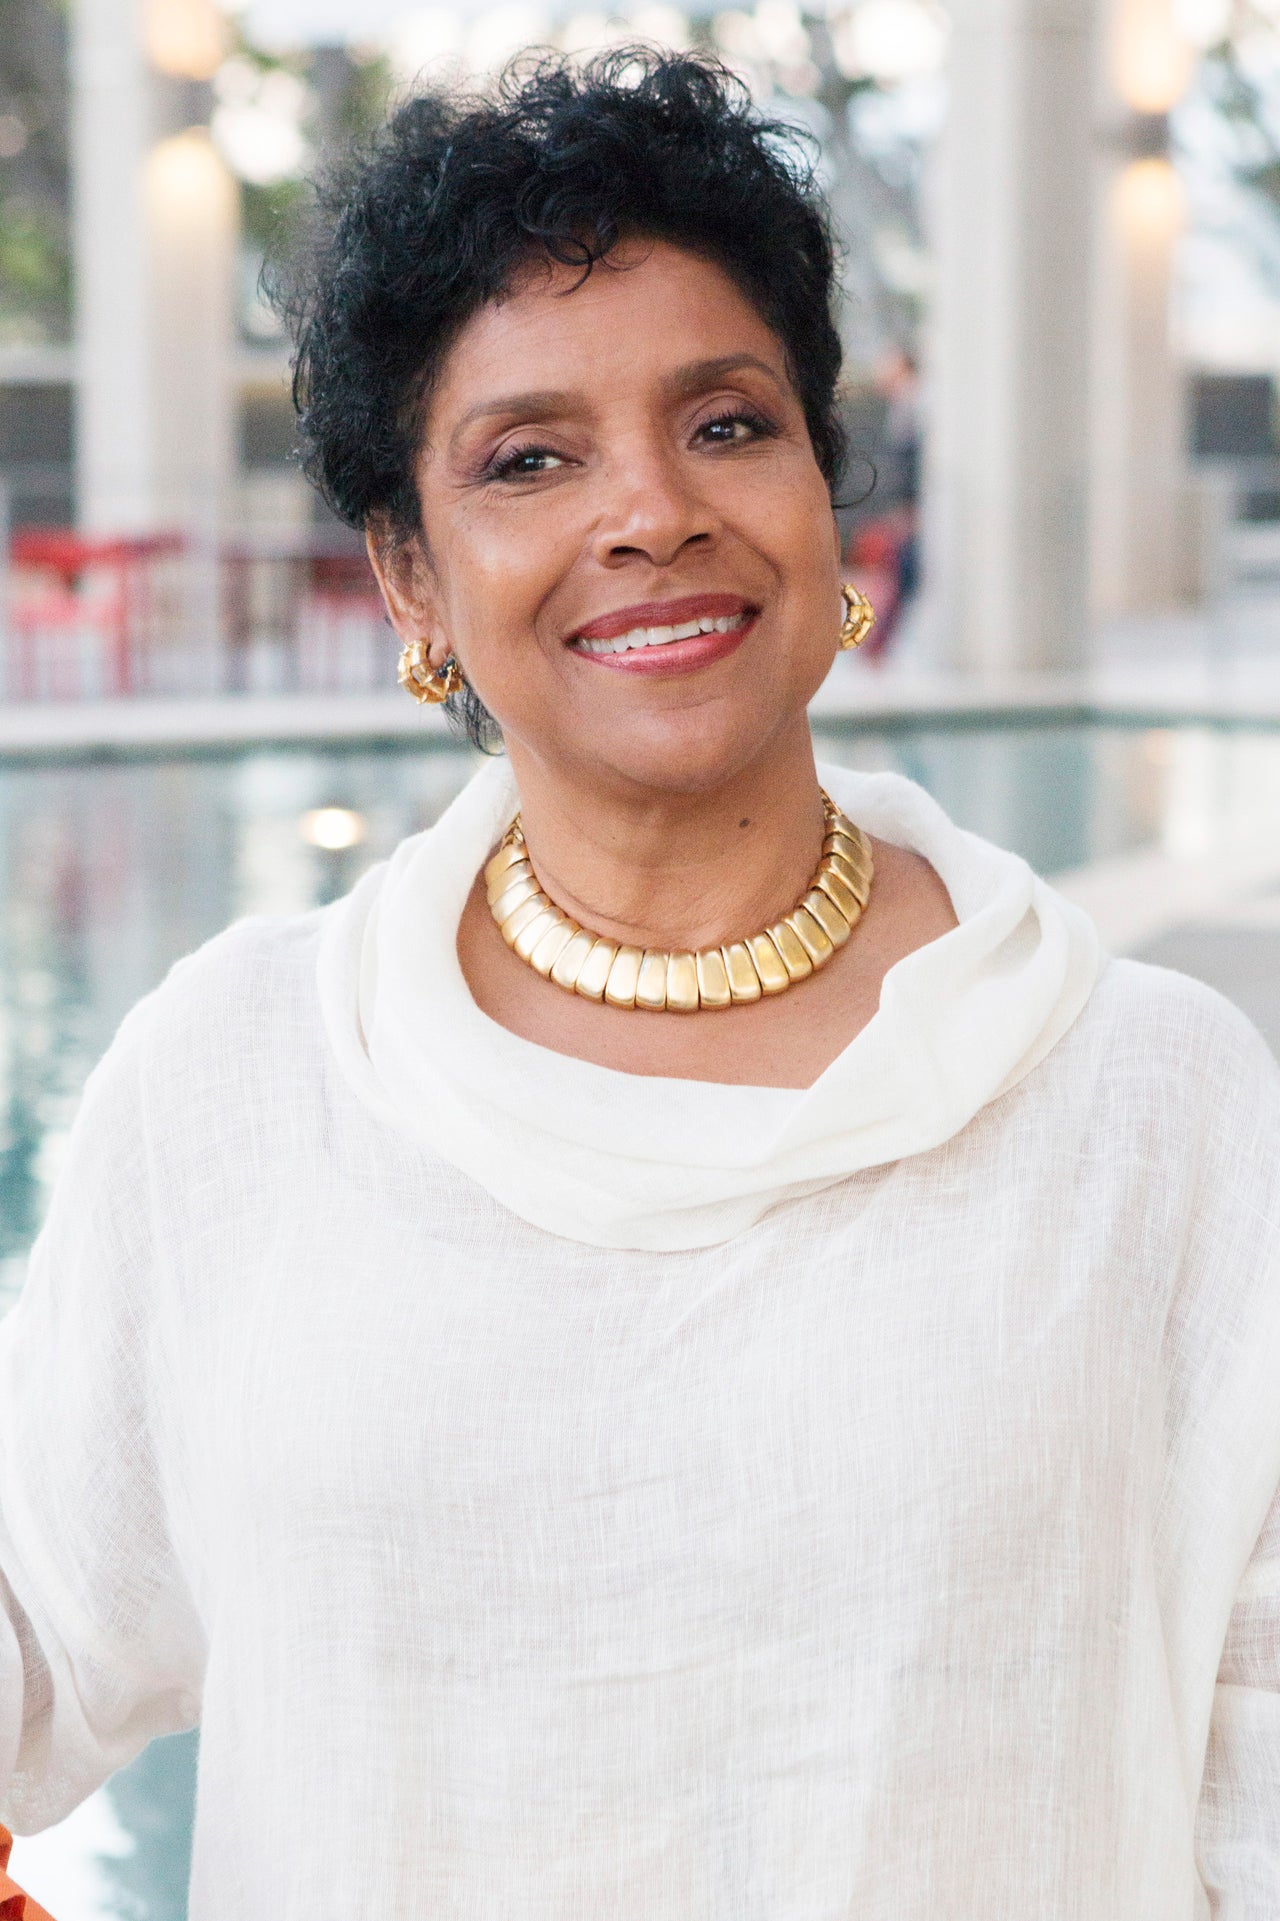 Here's Your First Look At Phylicia Rashad In 'This Is Us' | Essence